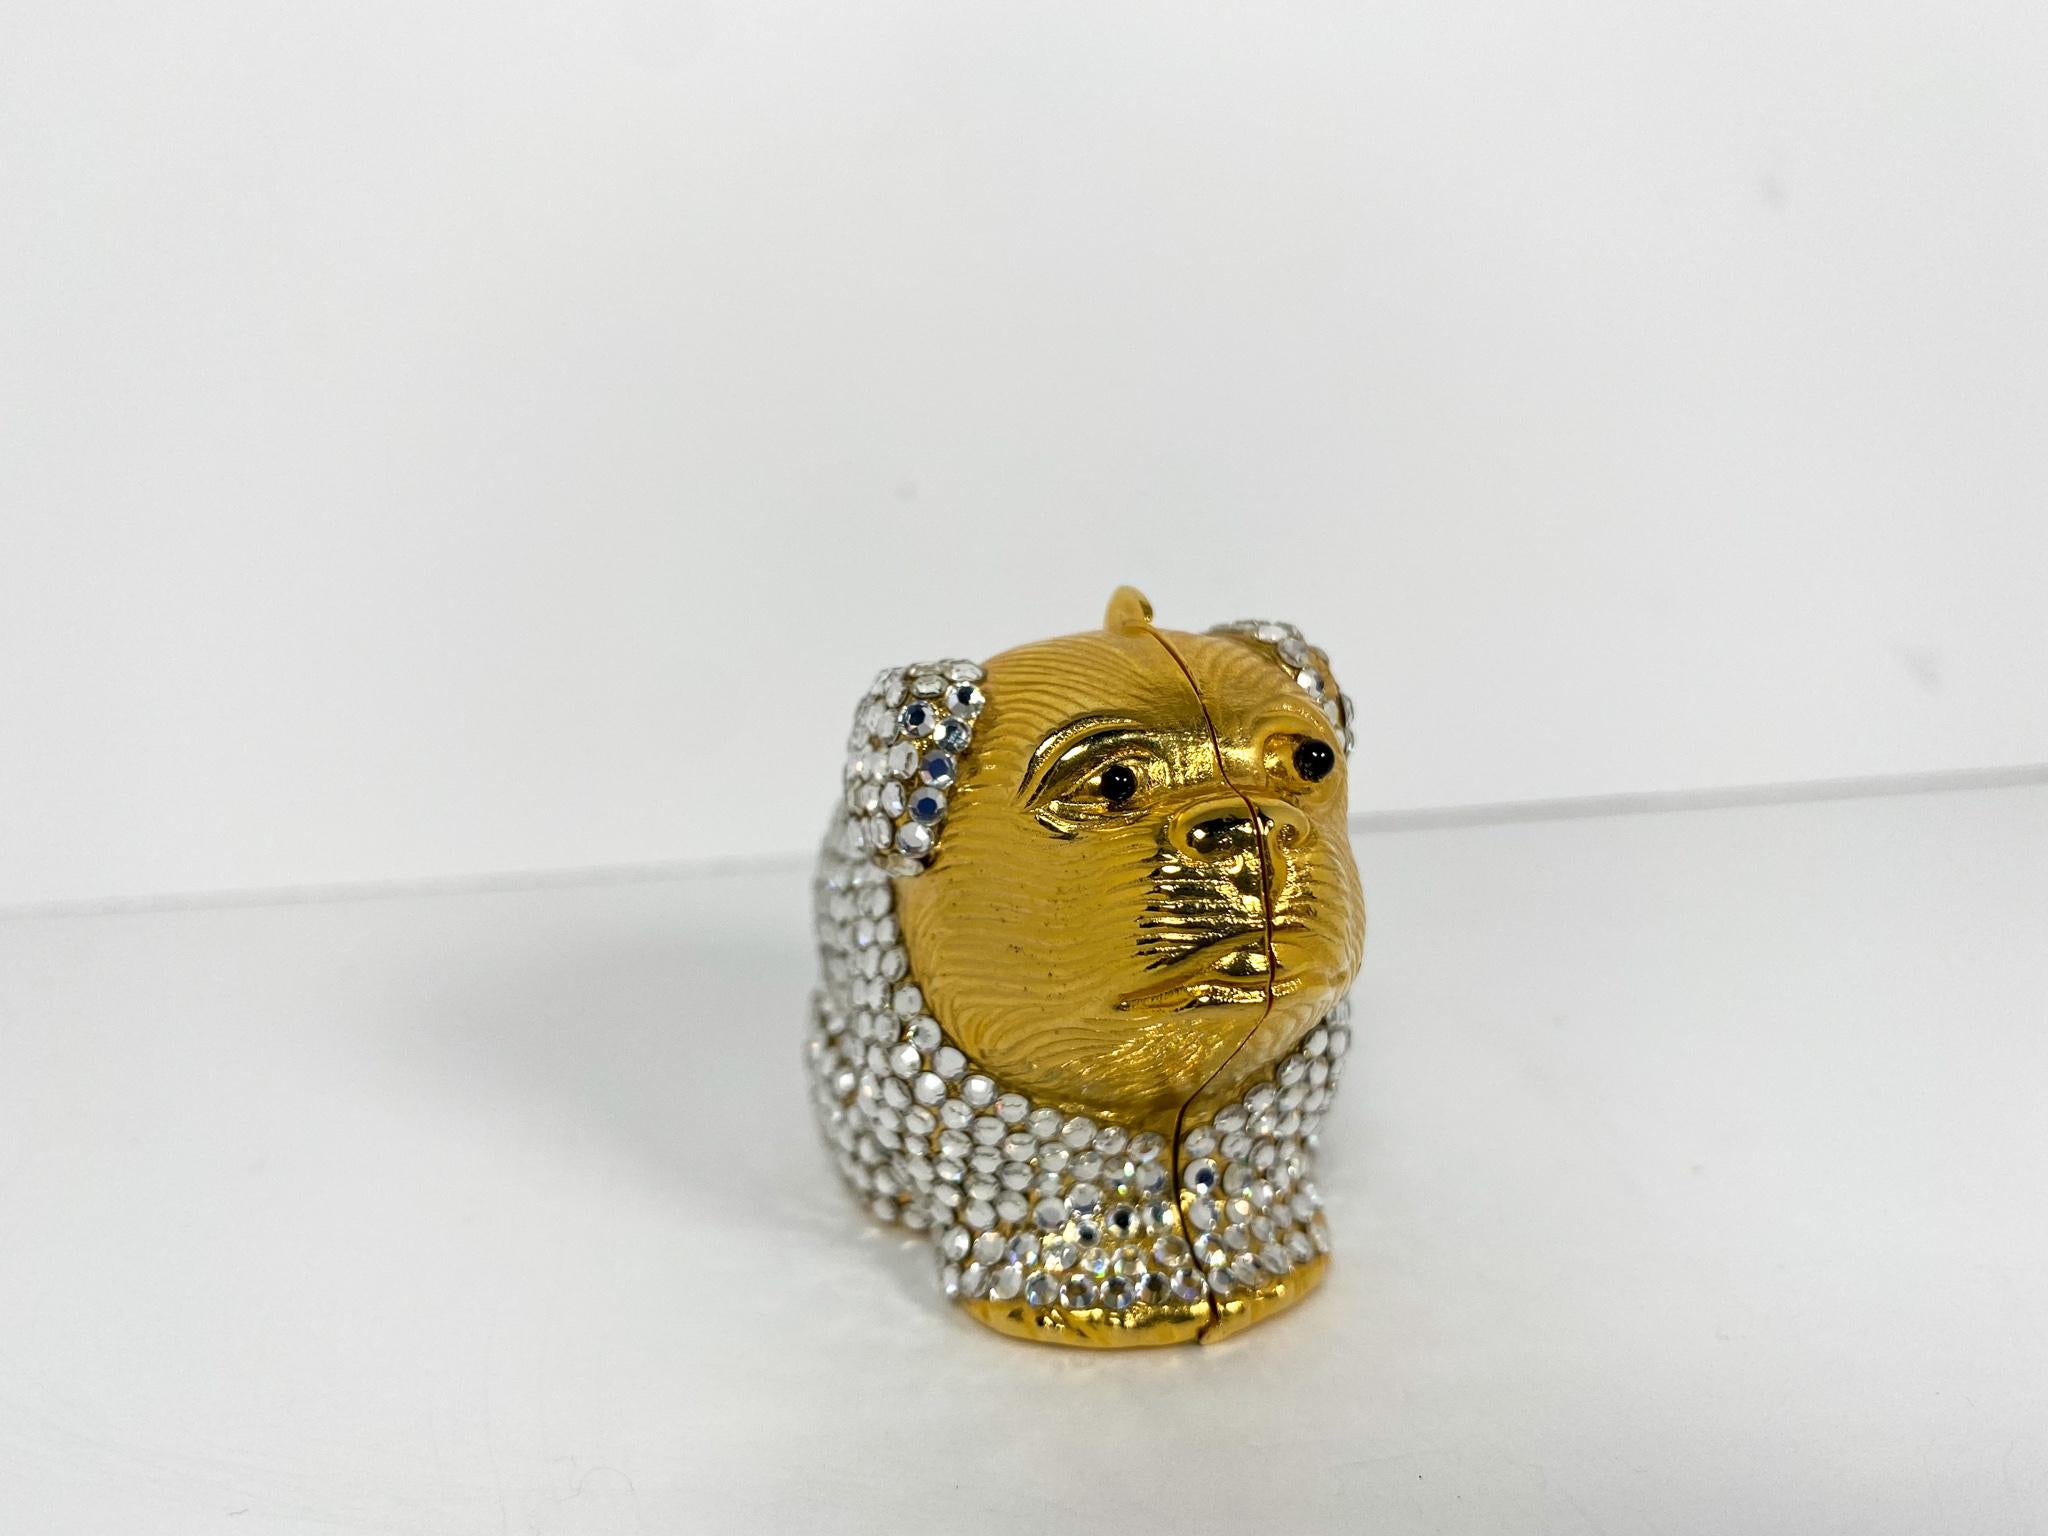 The sweetest accessory to have in your bag, gold-tone metal body in the shape of a bulldog covered in Swarovski crystals. 
		
Condition: Good used condition.
Exterior: Some loose and missing crystals.
Interior: Hallow hardware.
Serial Number: